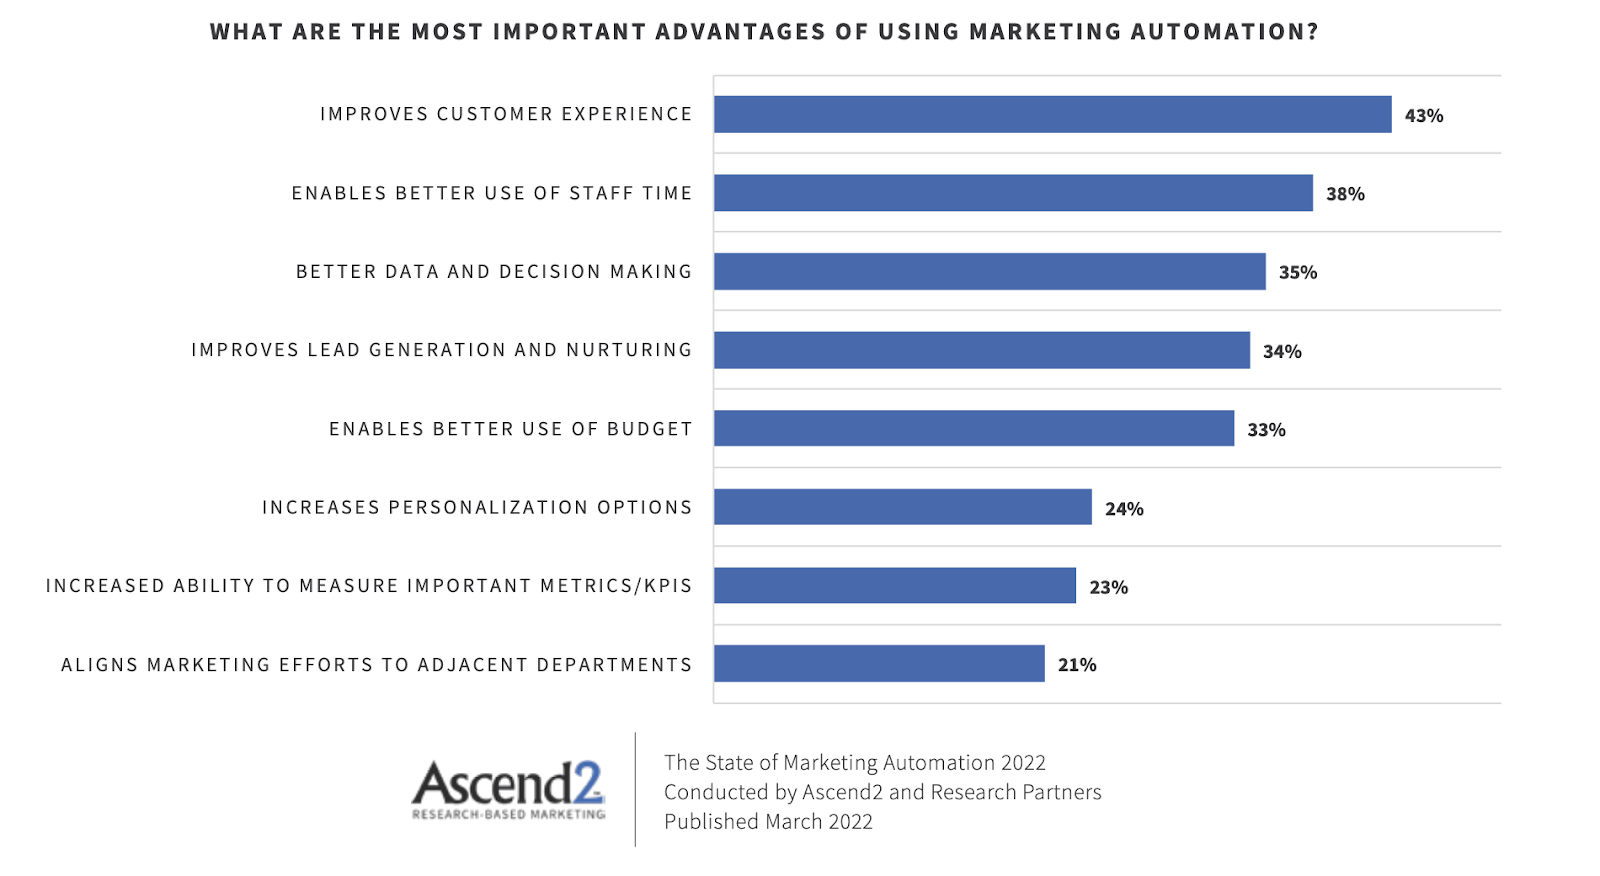 There are many benefits to using marketing automation, such as an improved customer experience and better use of staff time.